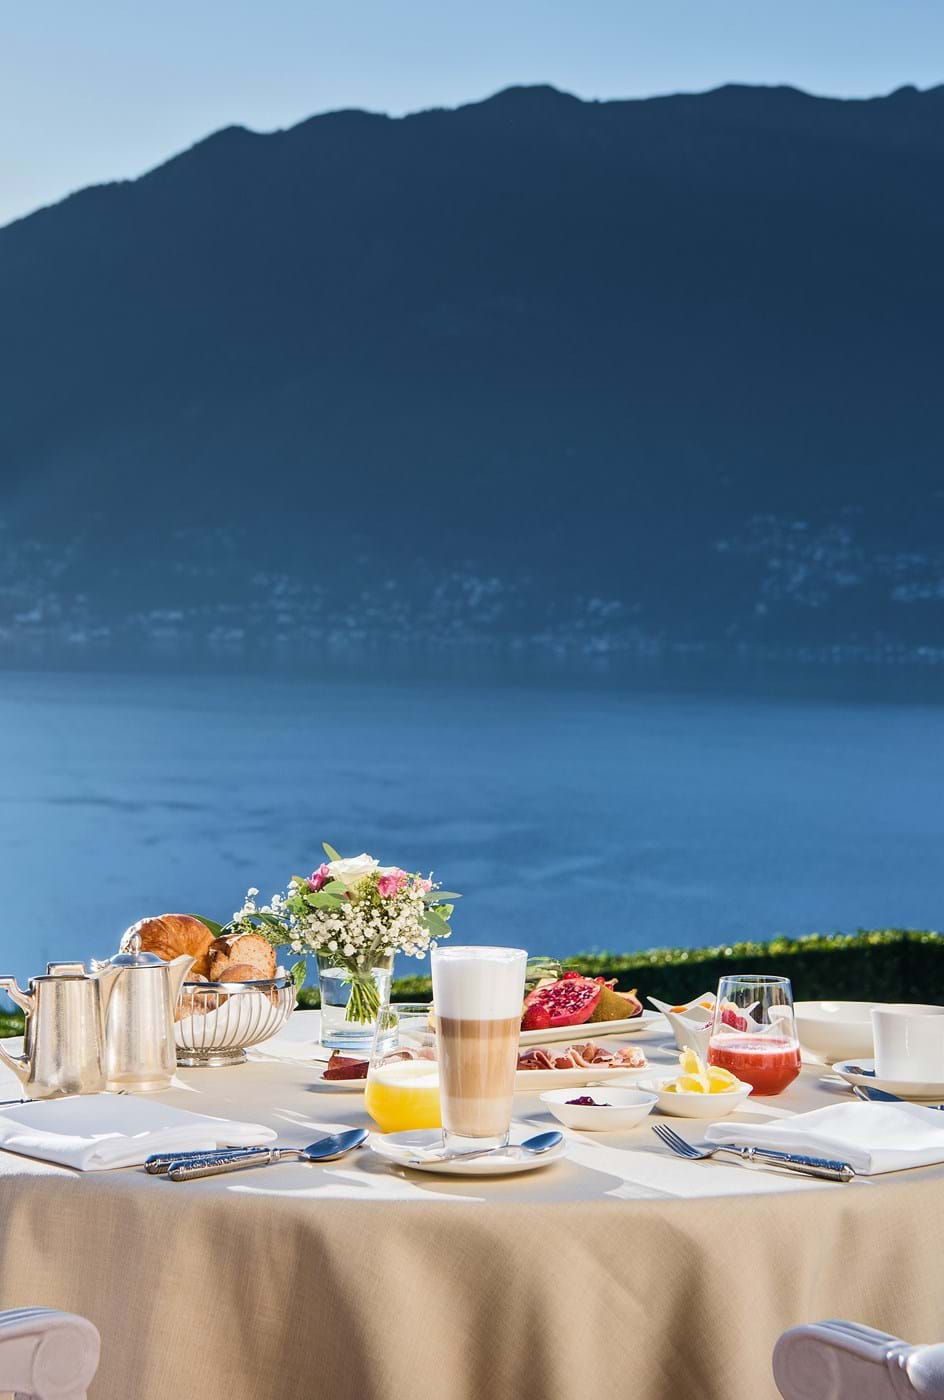 Experience - Easter Sunday Lunchbuffet with Panorama view